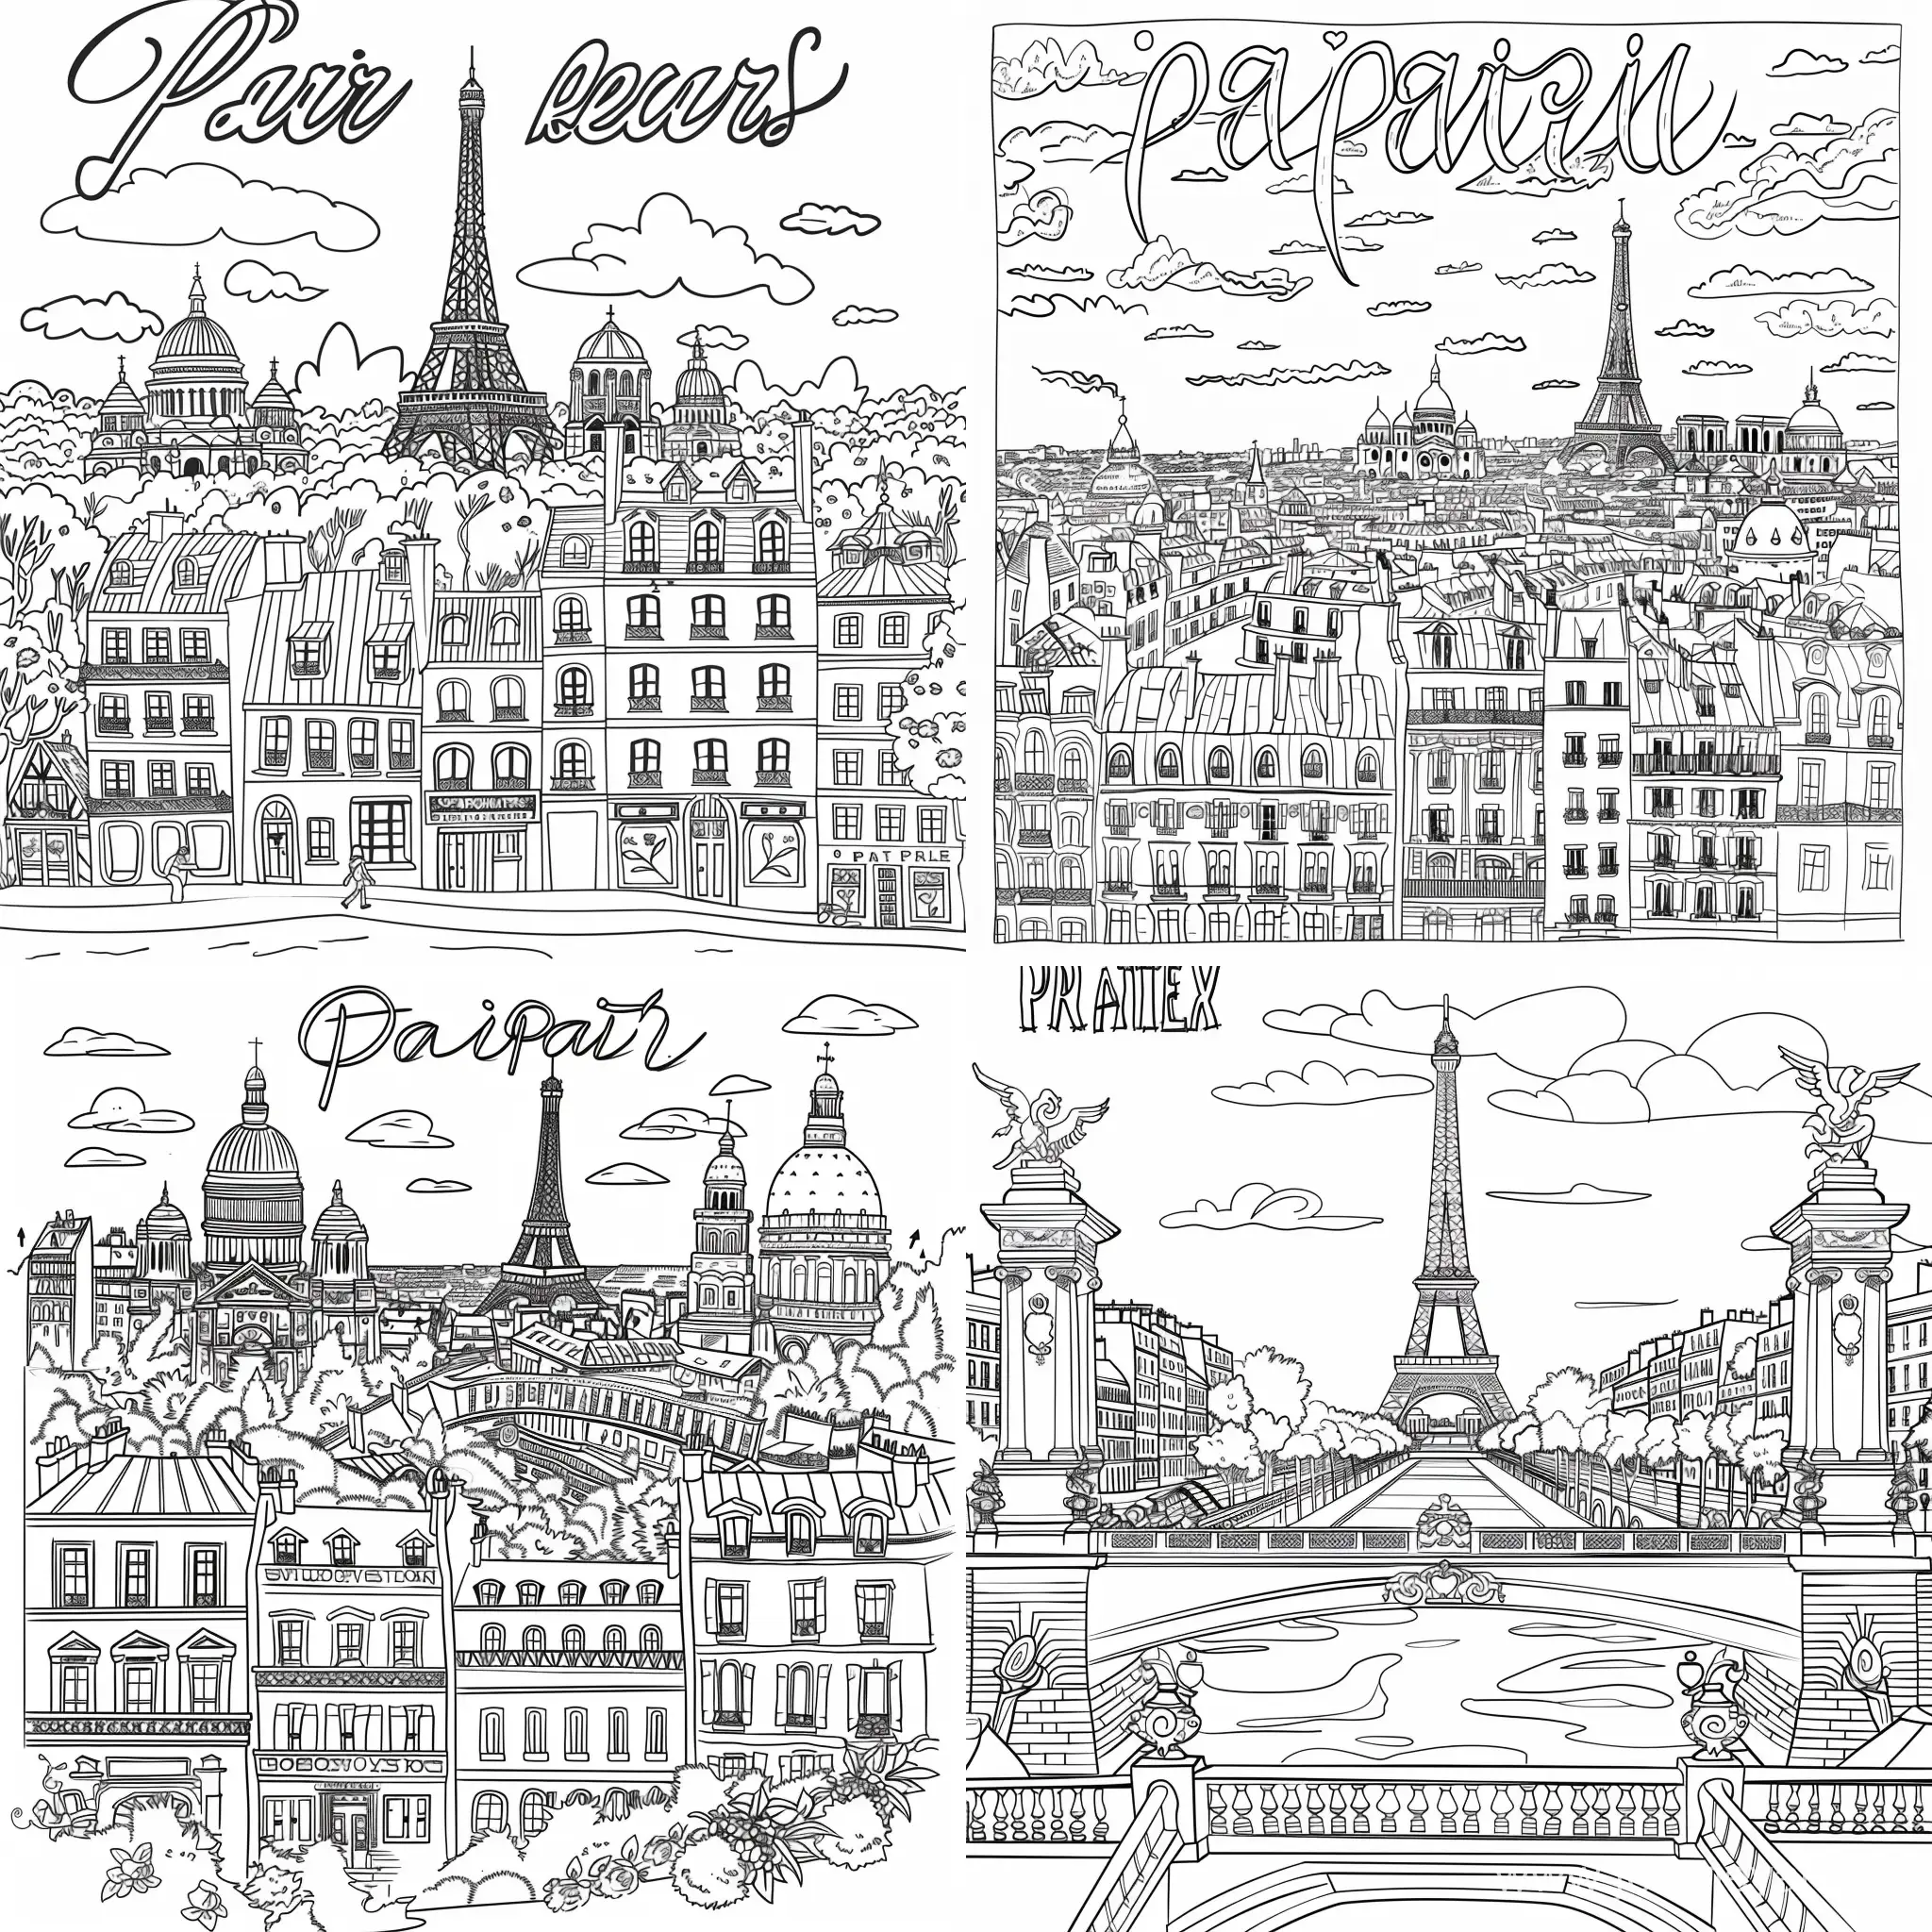 generate coloring book page based on Paris with Paris written on top